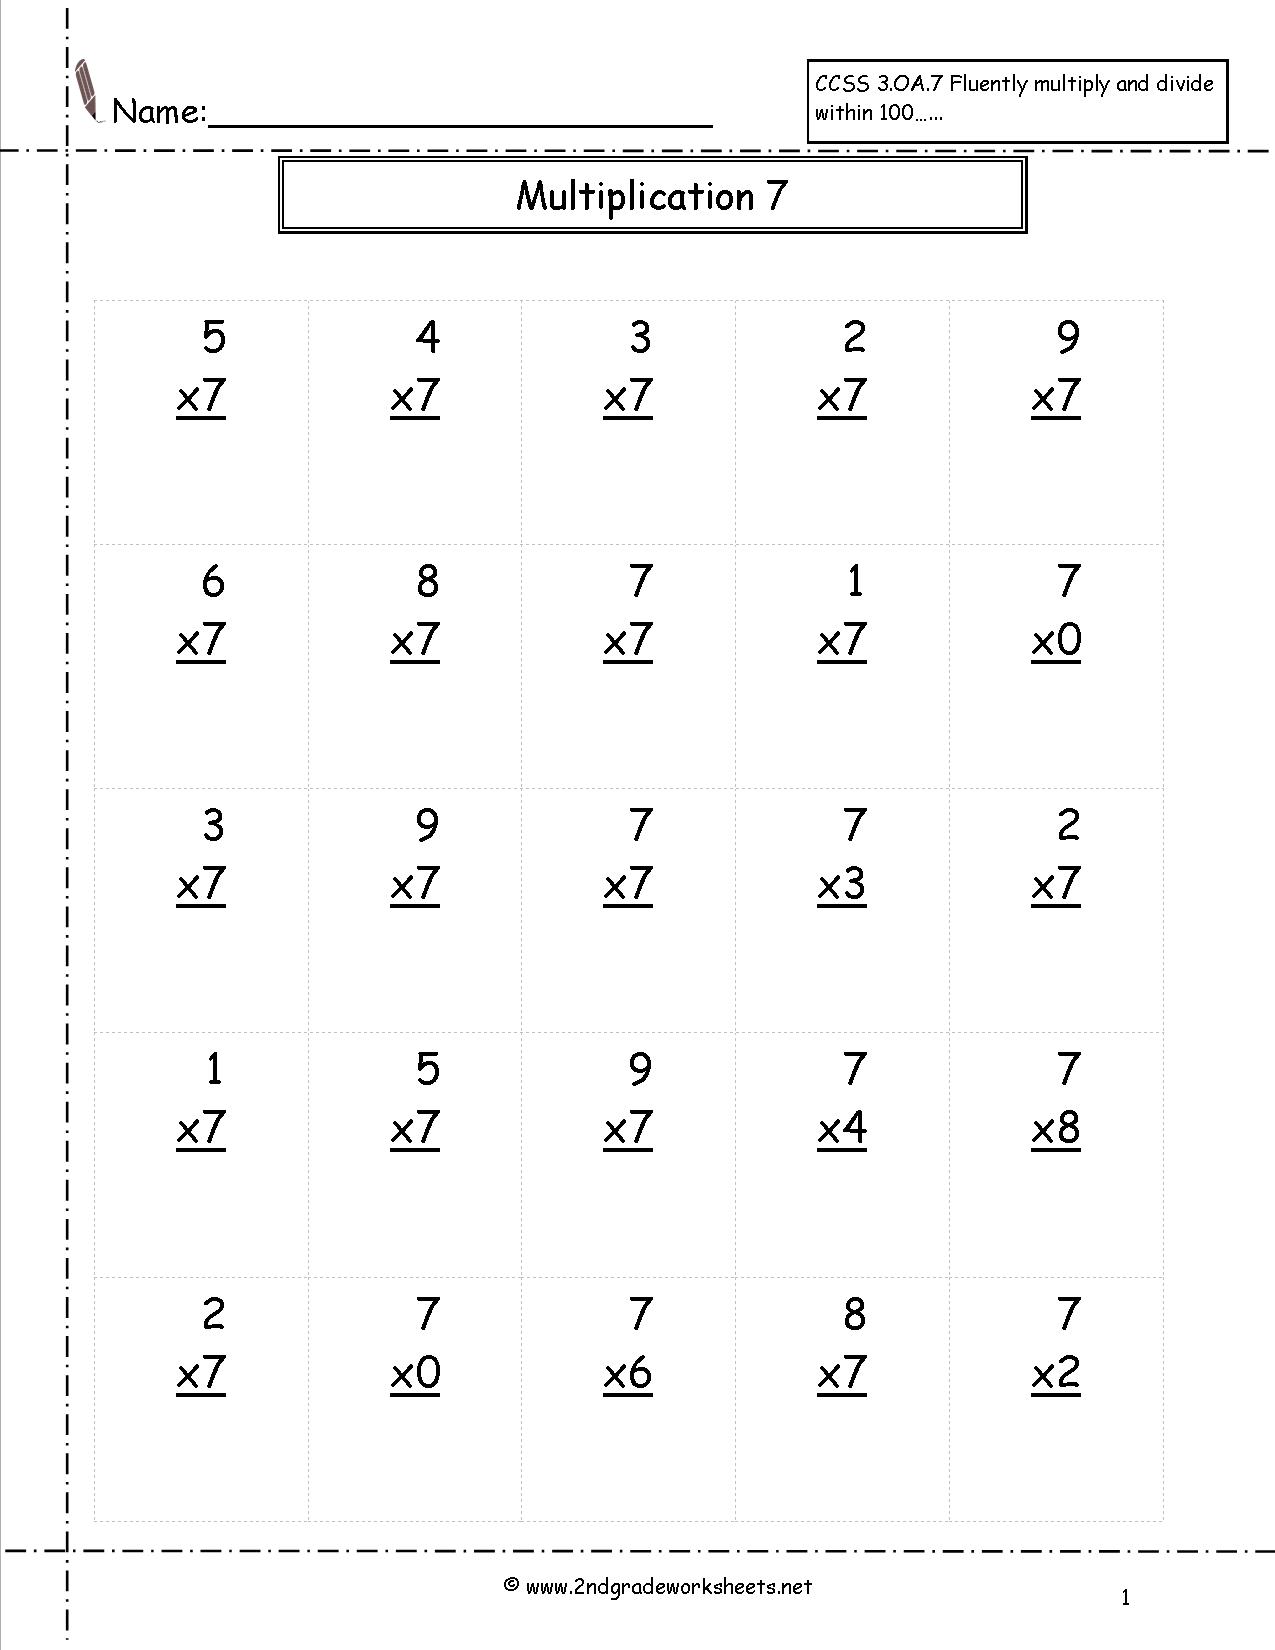 Multiplication Worksheets And Printouts X 7 Multiplica